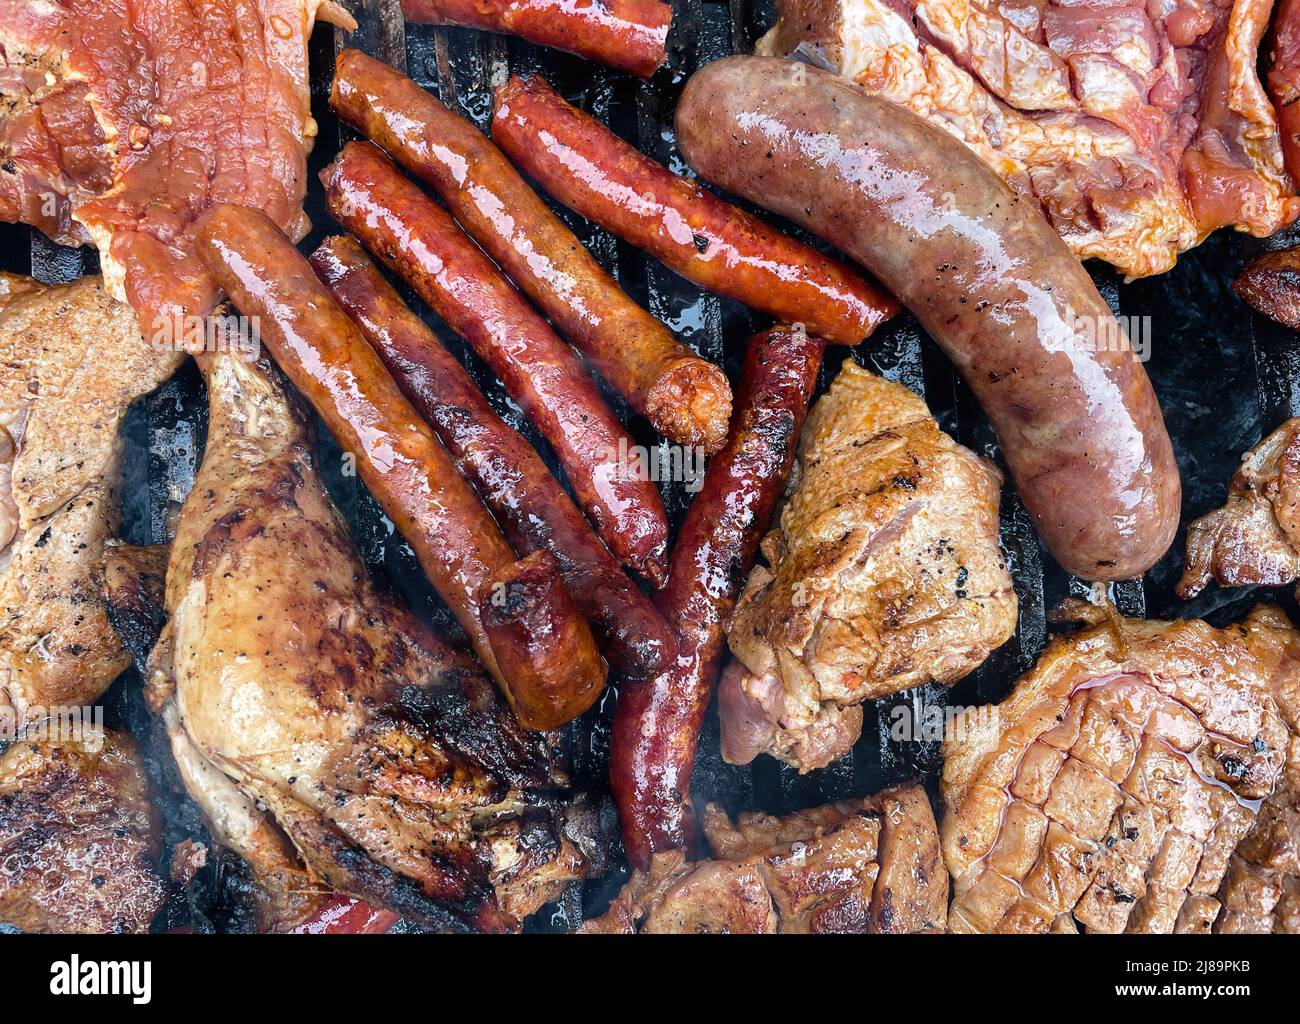 Marinated meat on charcoal grill bbq grilling chicken sausage and pork Stock Photo